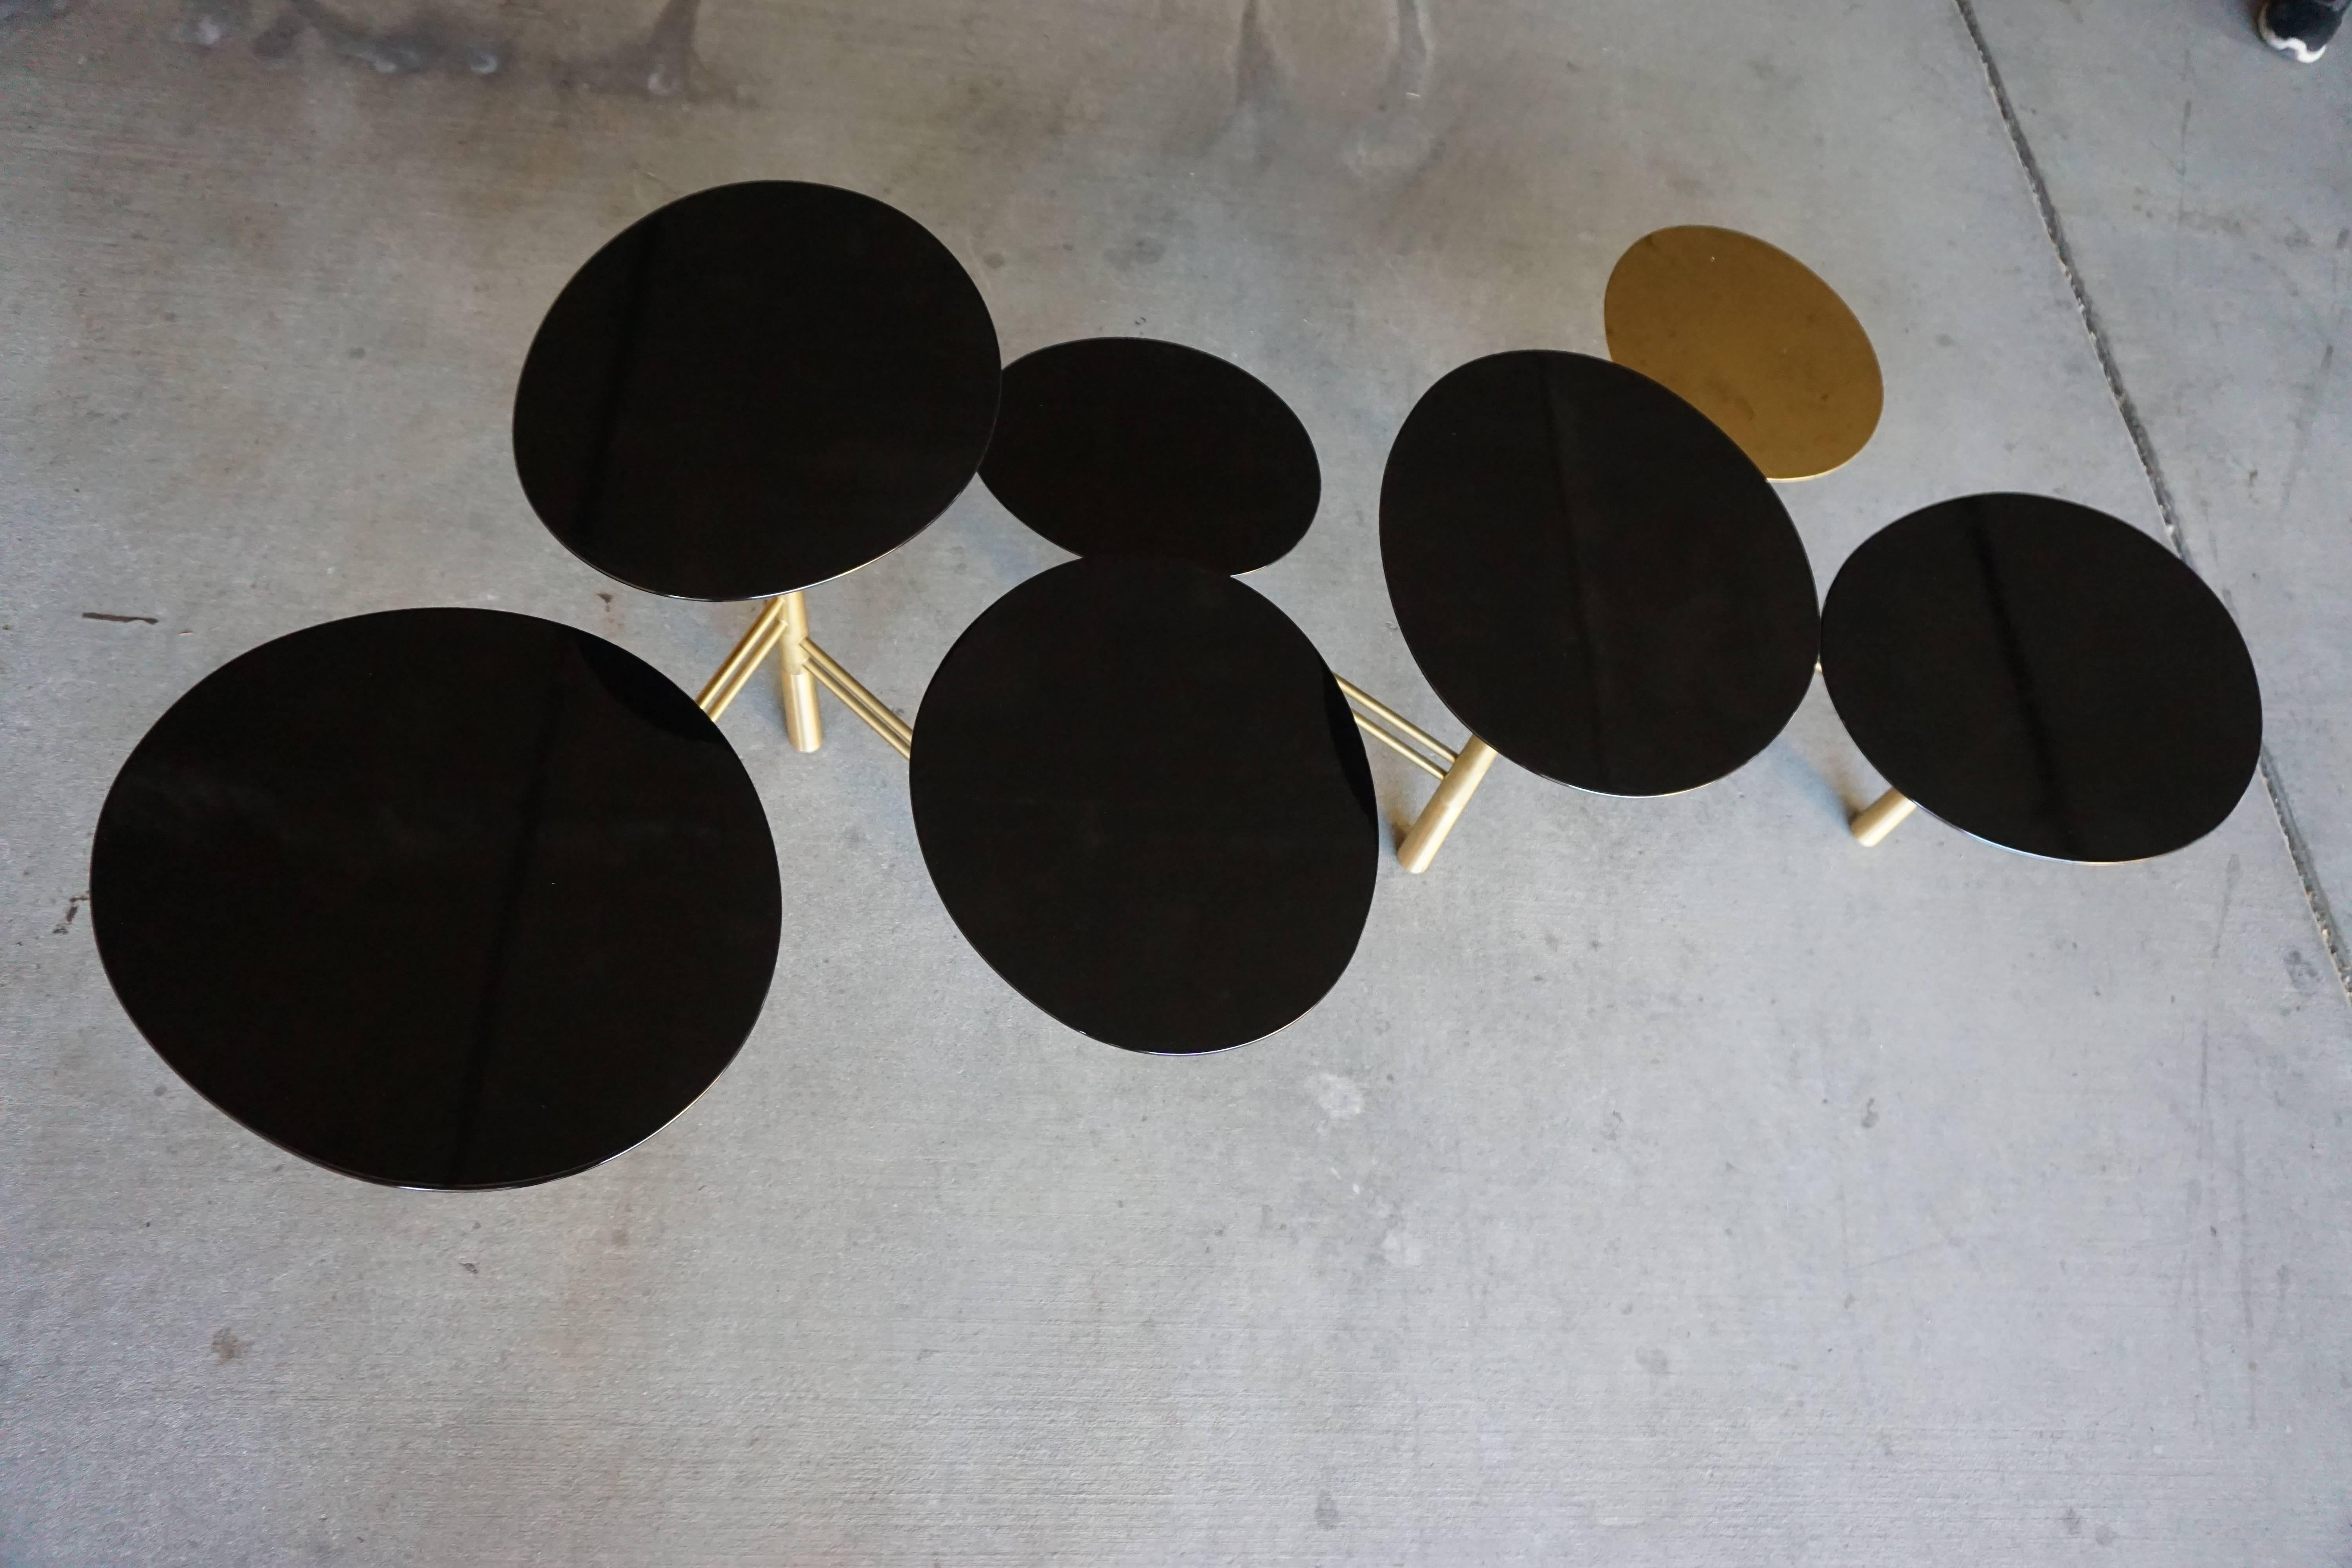 The pebble table is a contemporary brass and black lacquered multi-tiered low table by Lebanese furniture designer Nada Debs. The table has a brushed brass articulated base with six black lacquered "pebble" tops and one brass